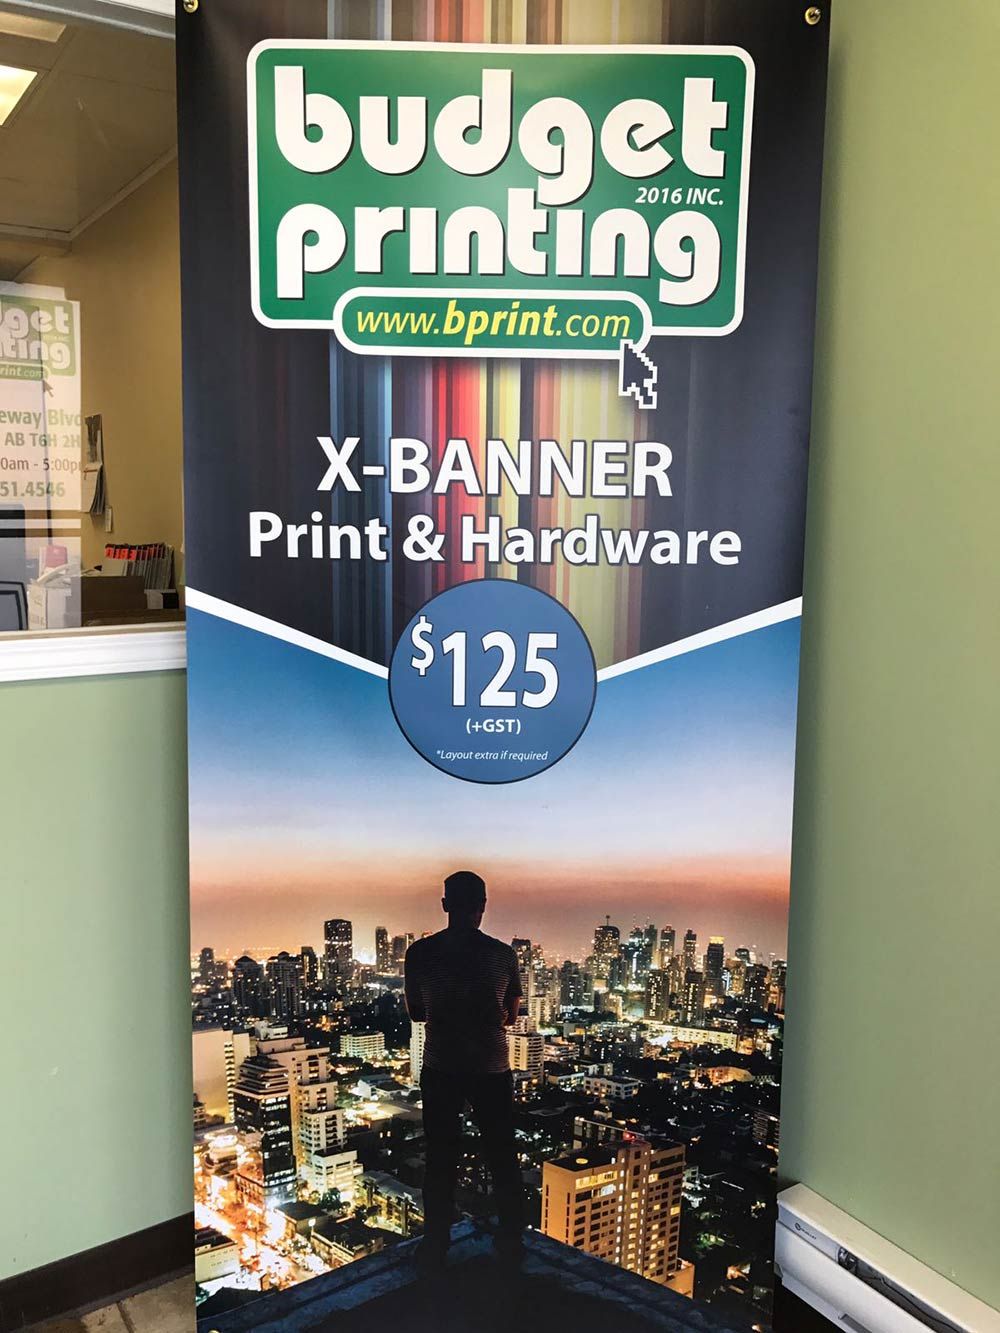 choose budget printing for professional banners in Edmonton